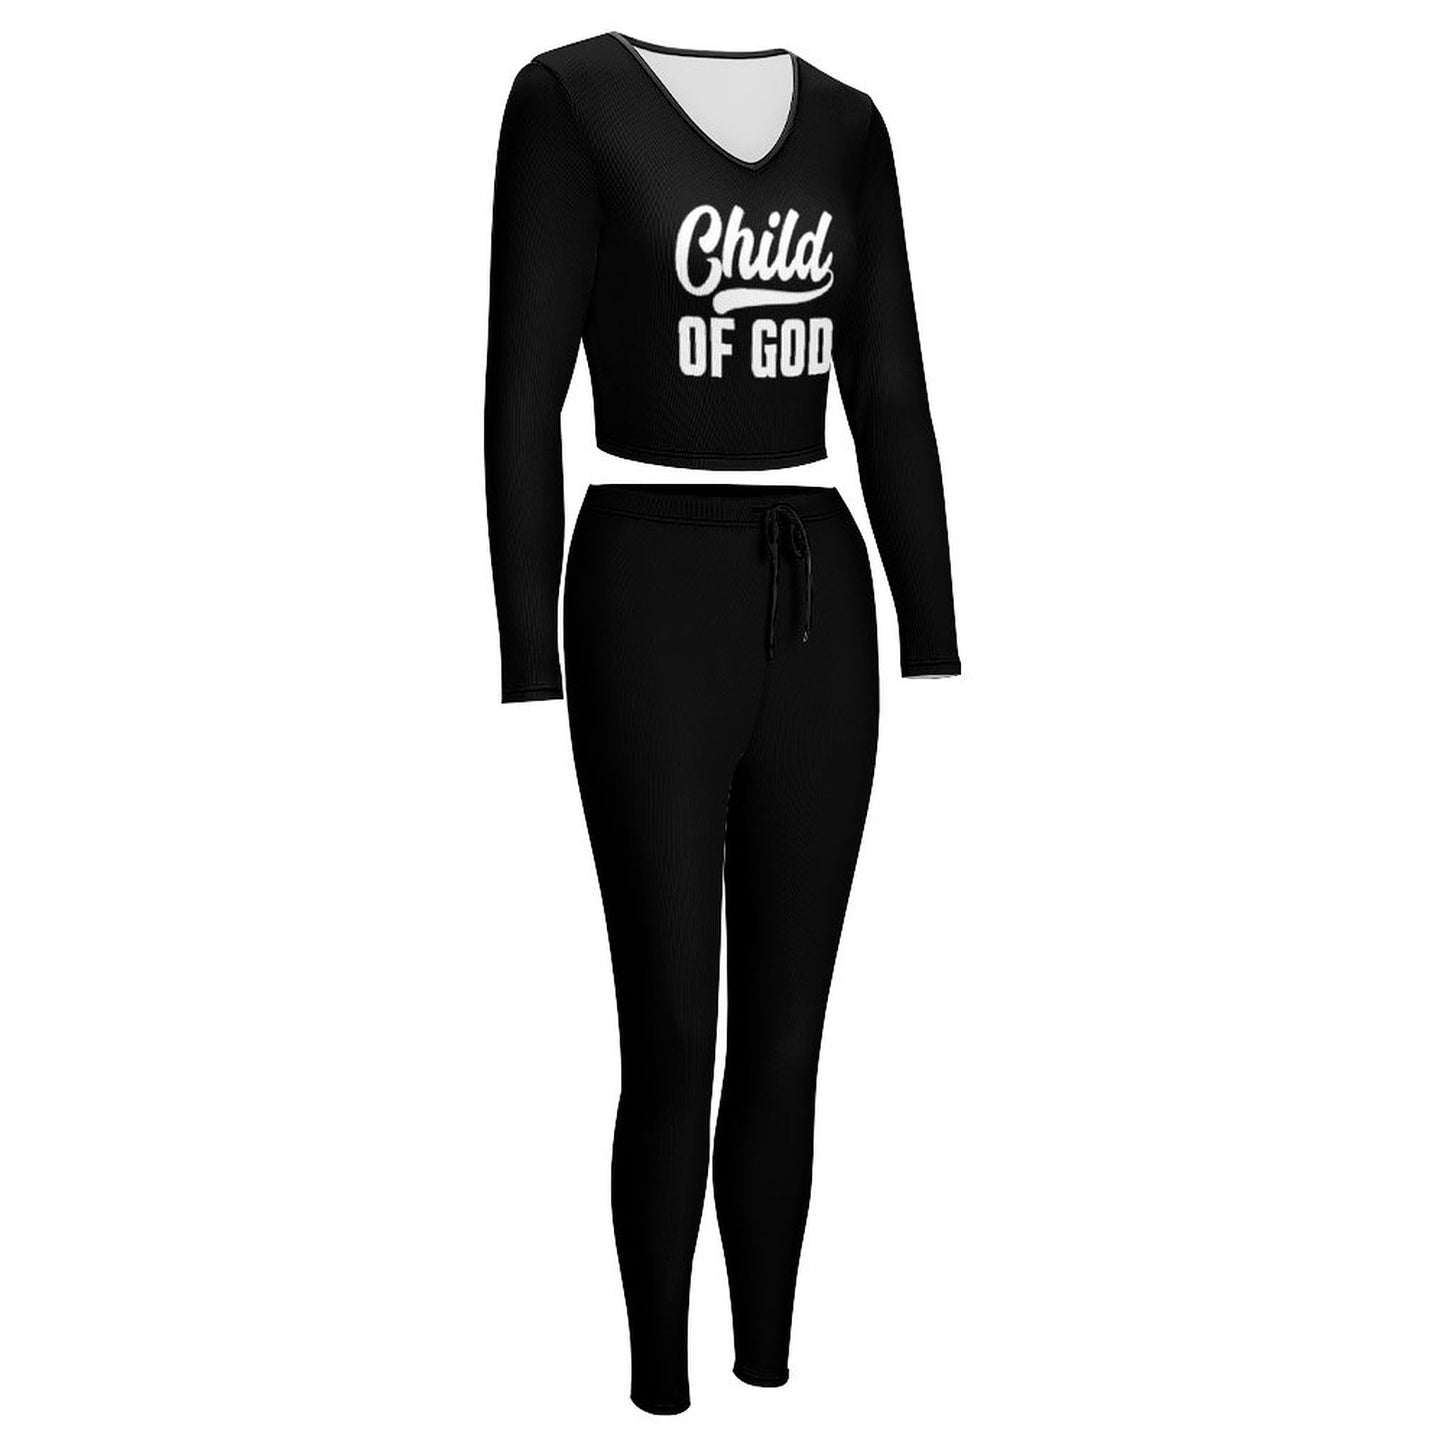 Child Of God Women's Christian Casual Outfit V neck Sweatshirt Set  SALE-Personal Design